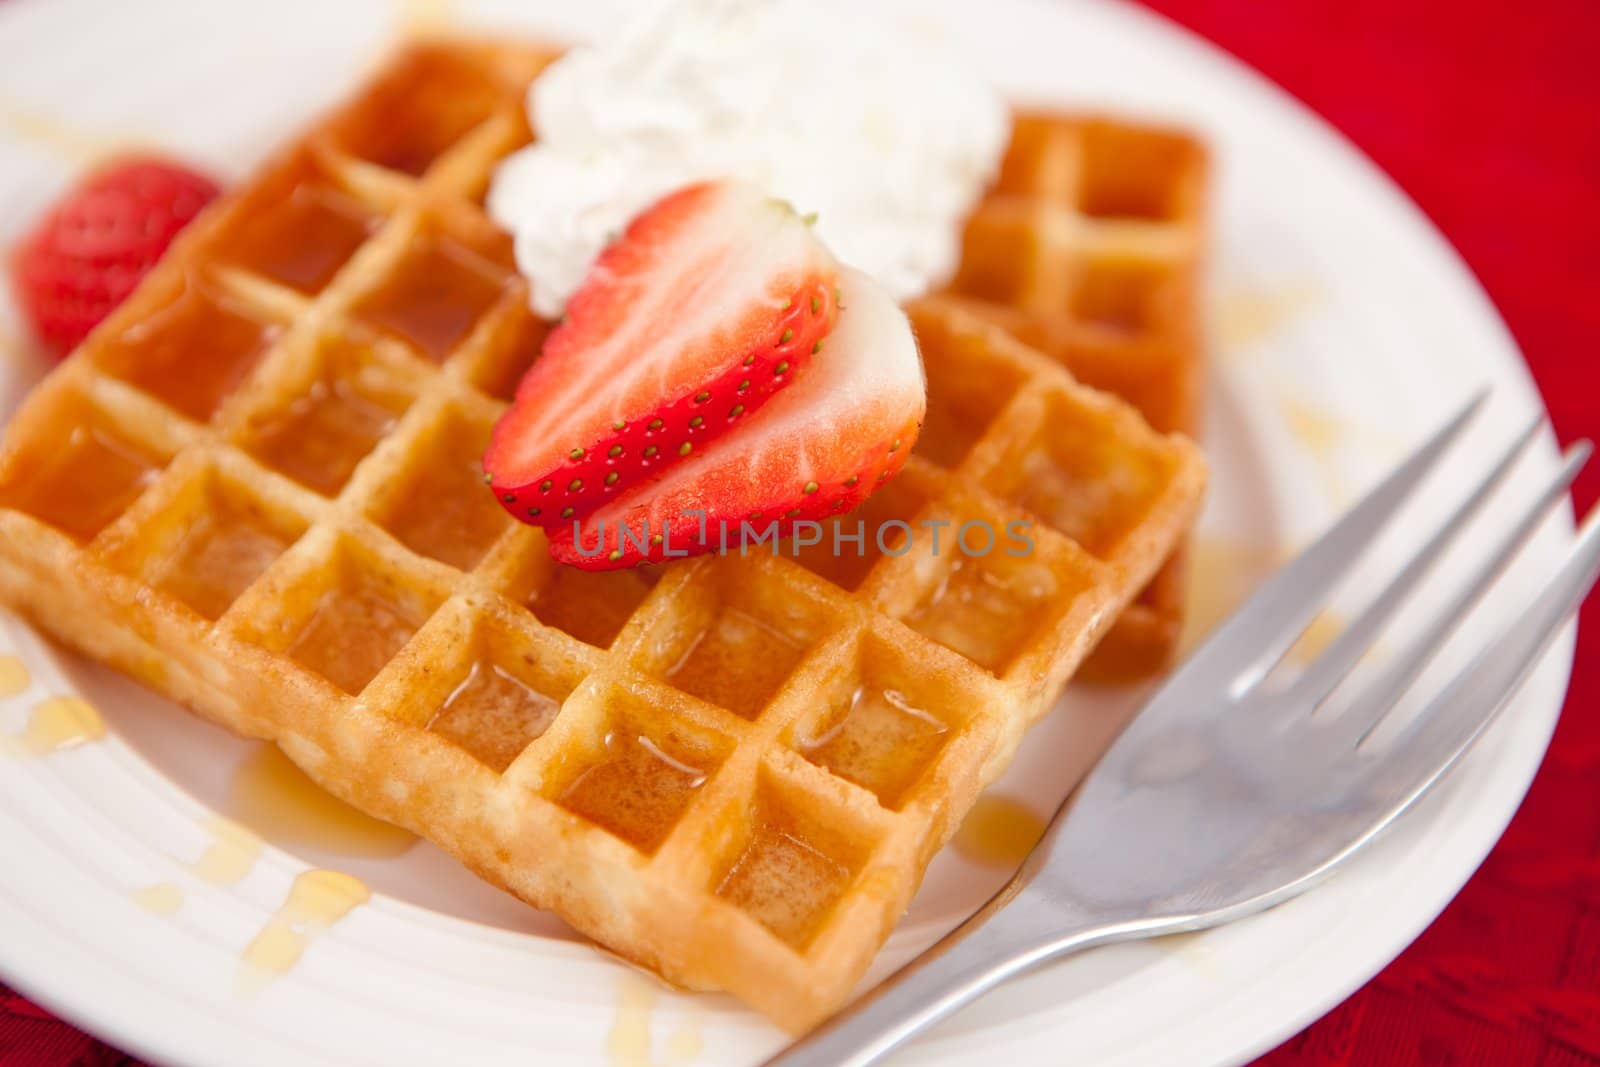 Waffles with whipped cream and strawberry on it by Wavebreakmedia